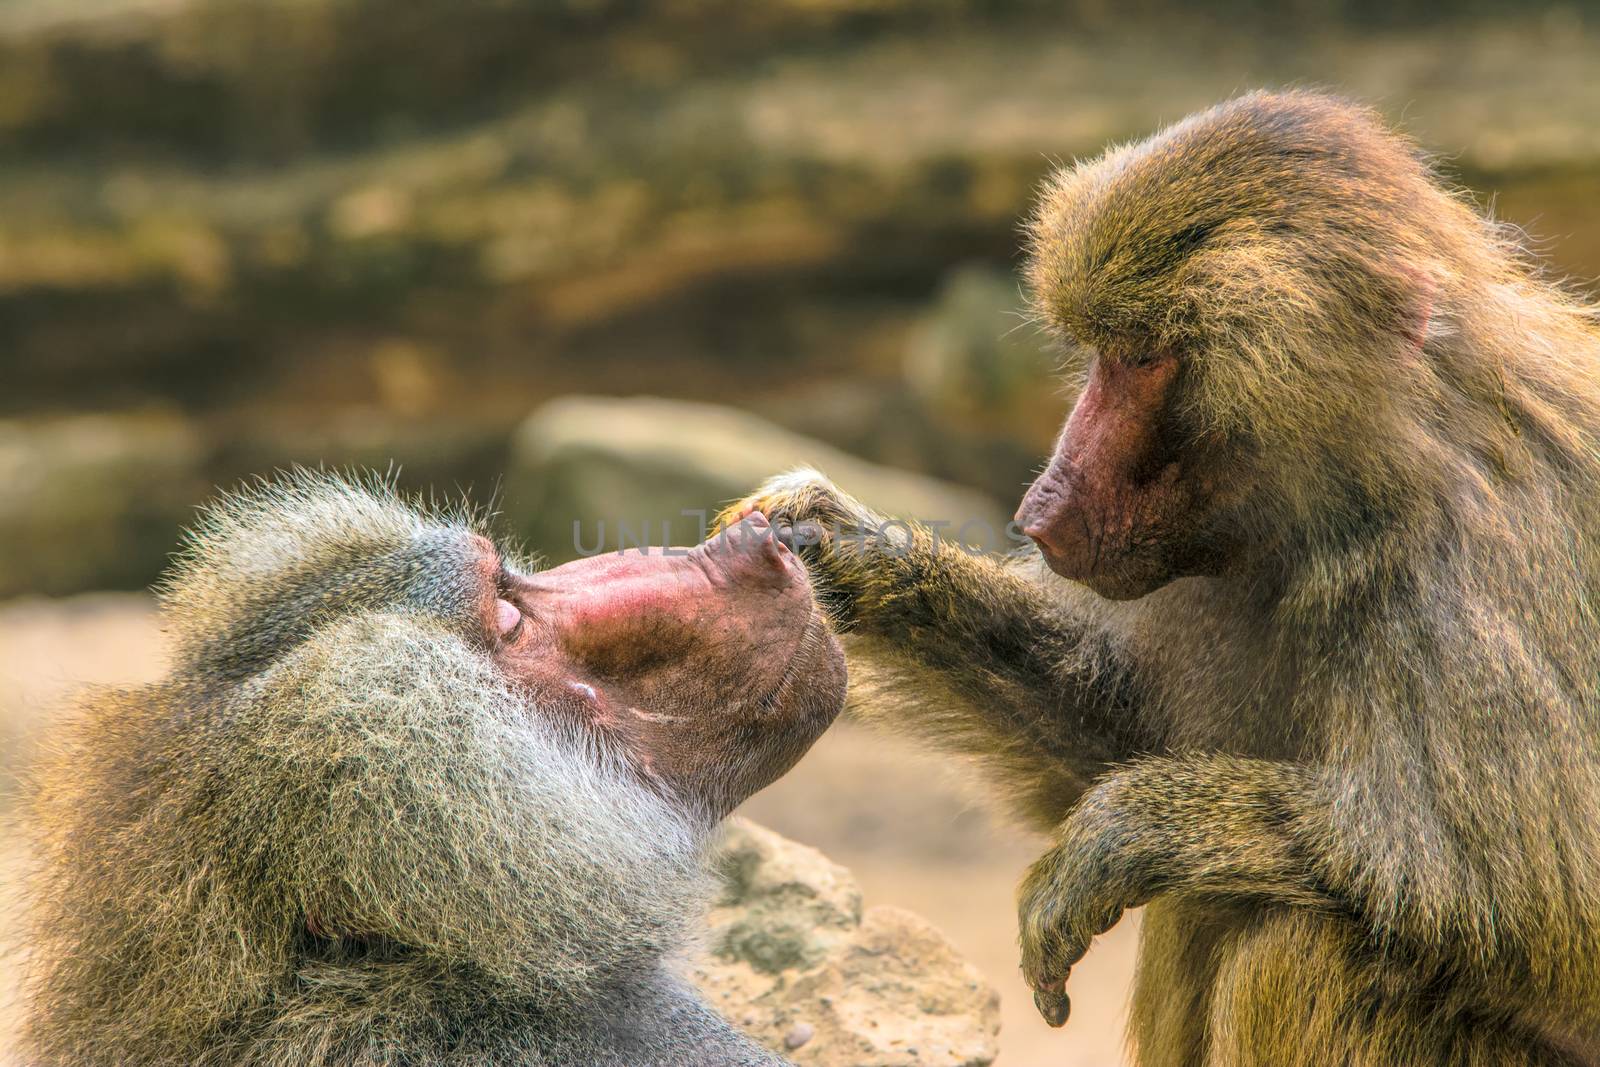 Hamadryas Baboon taking care of each other by nickfox